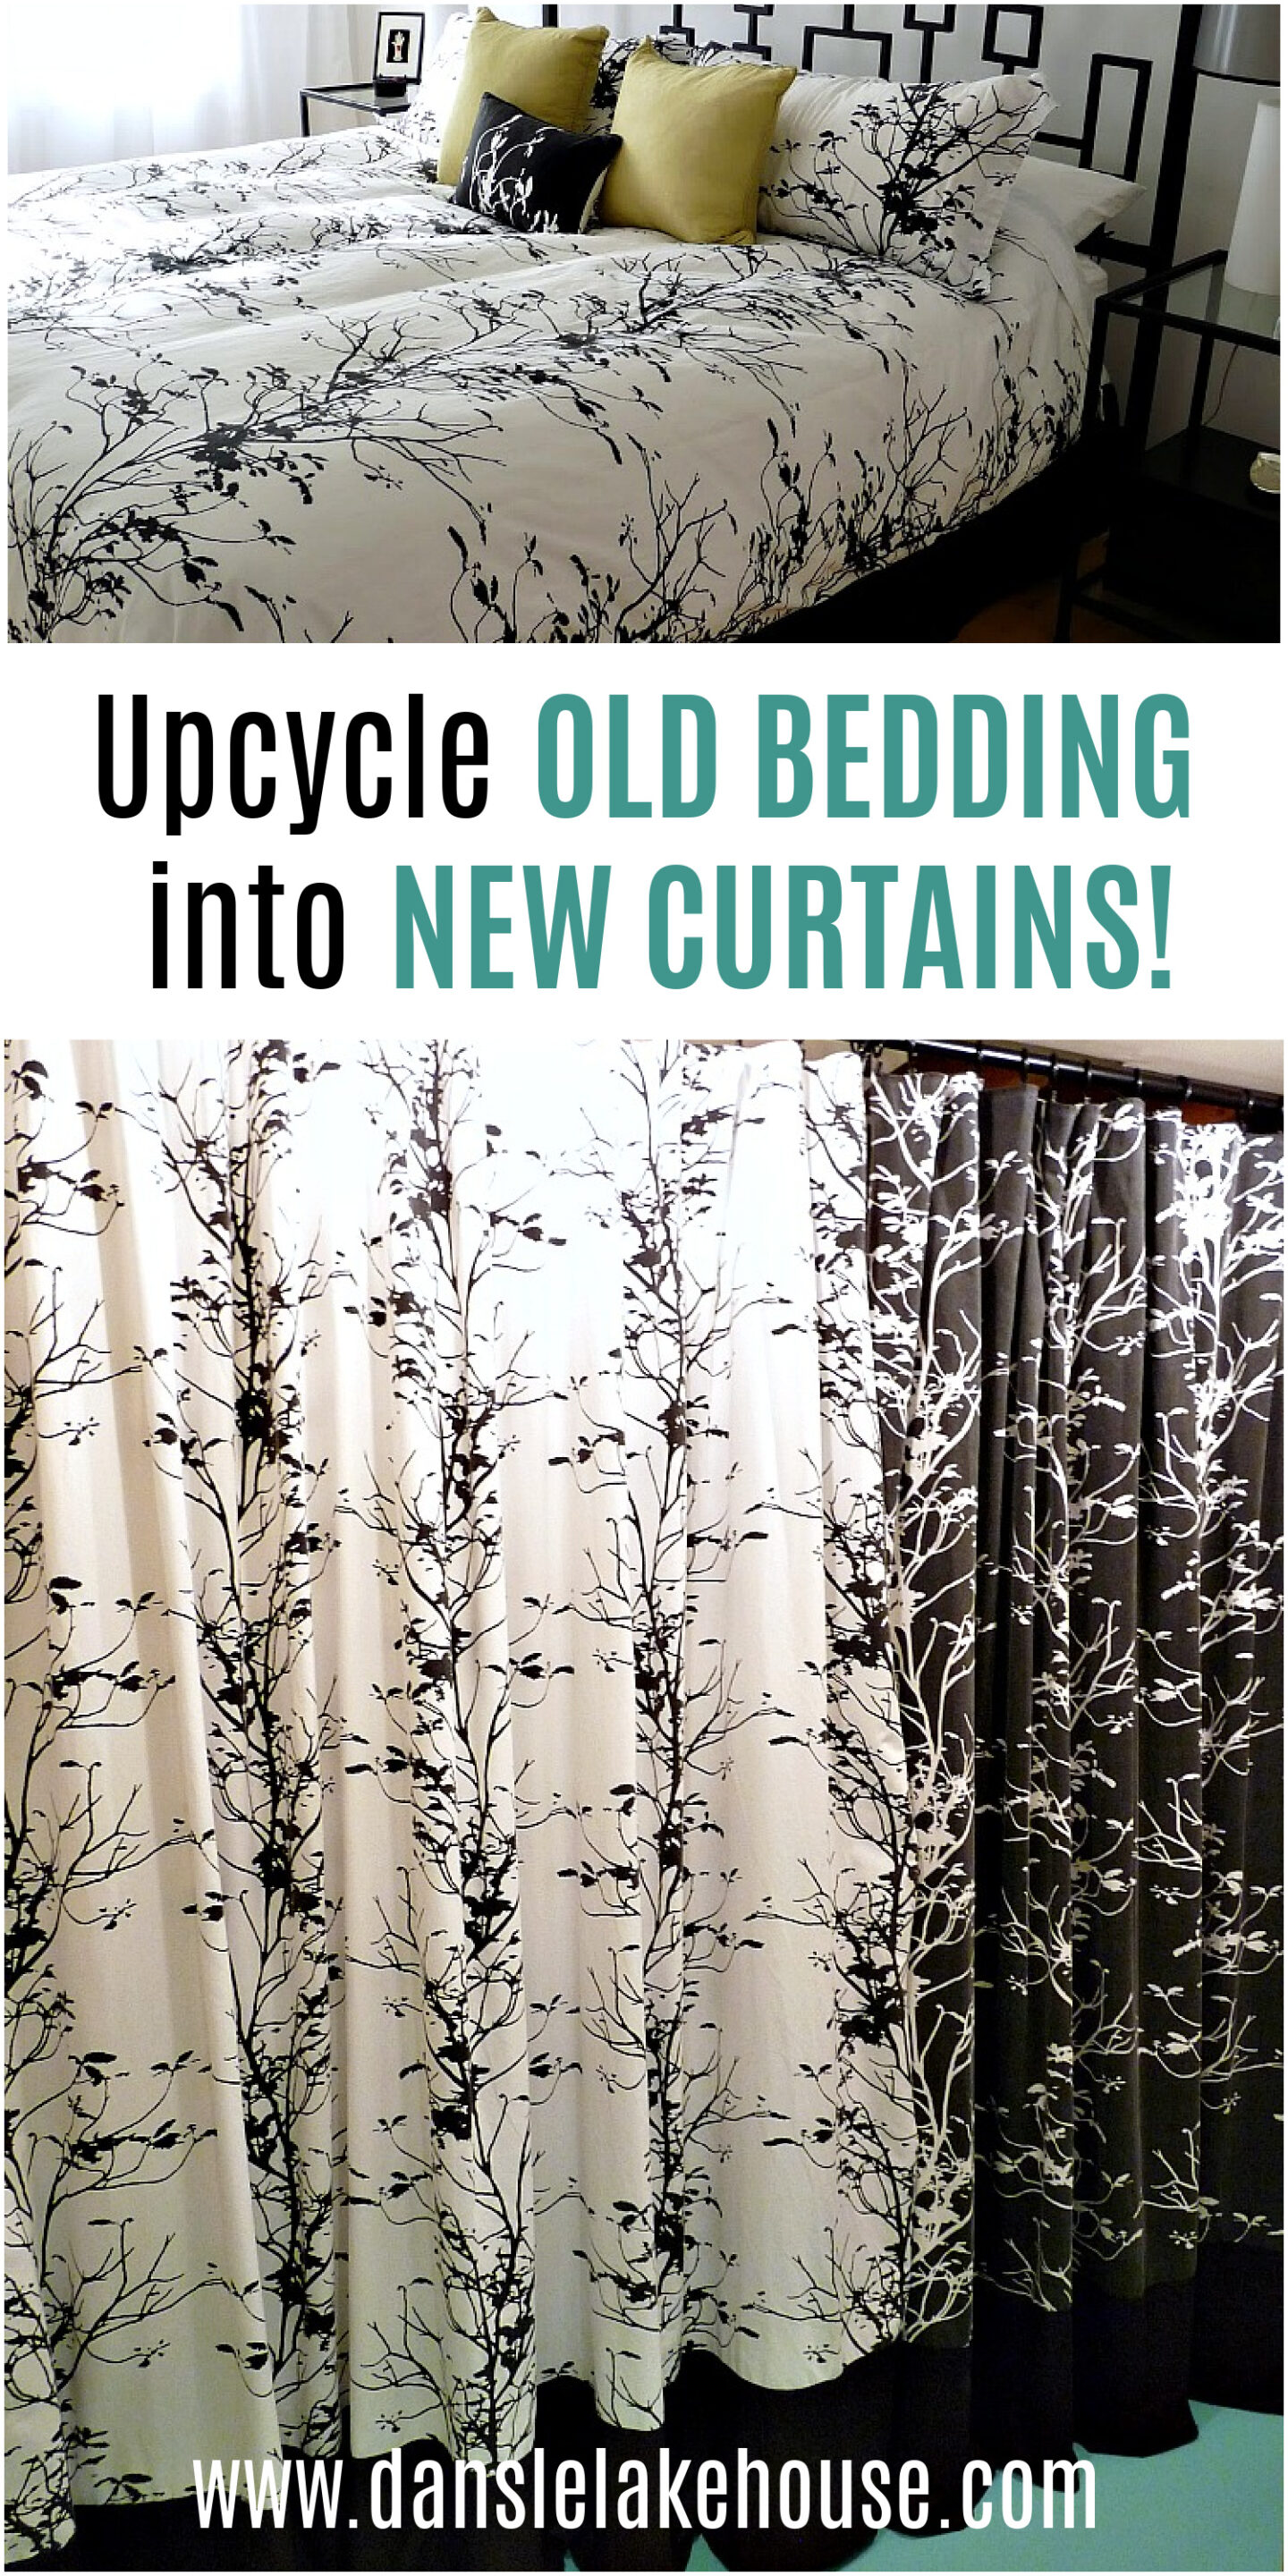 Upcycle bedding into new curtains